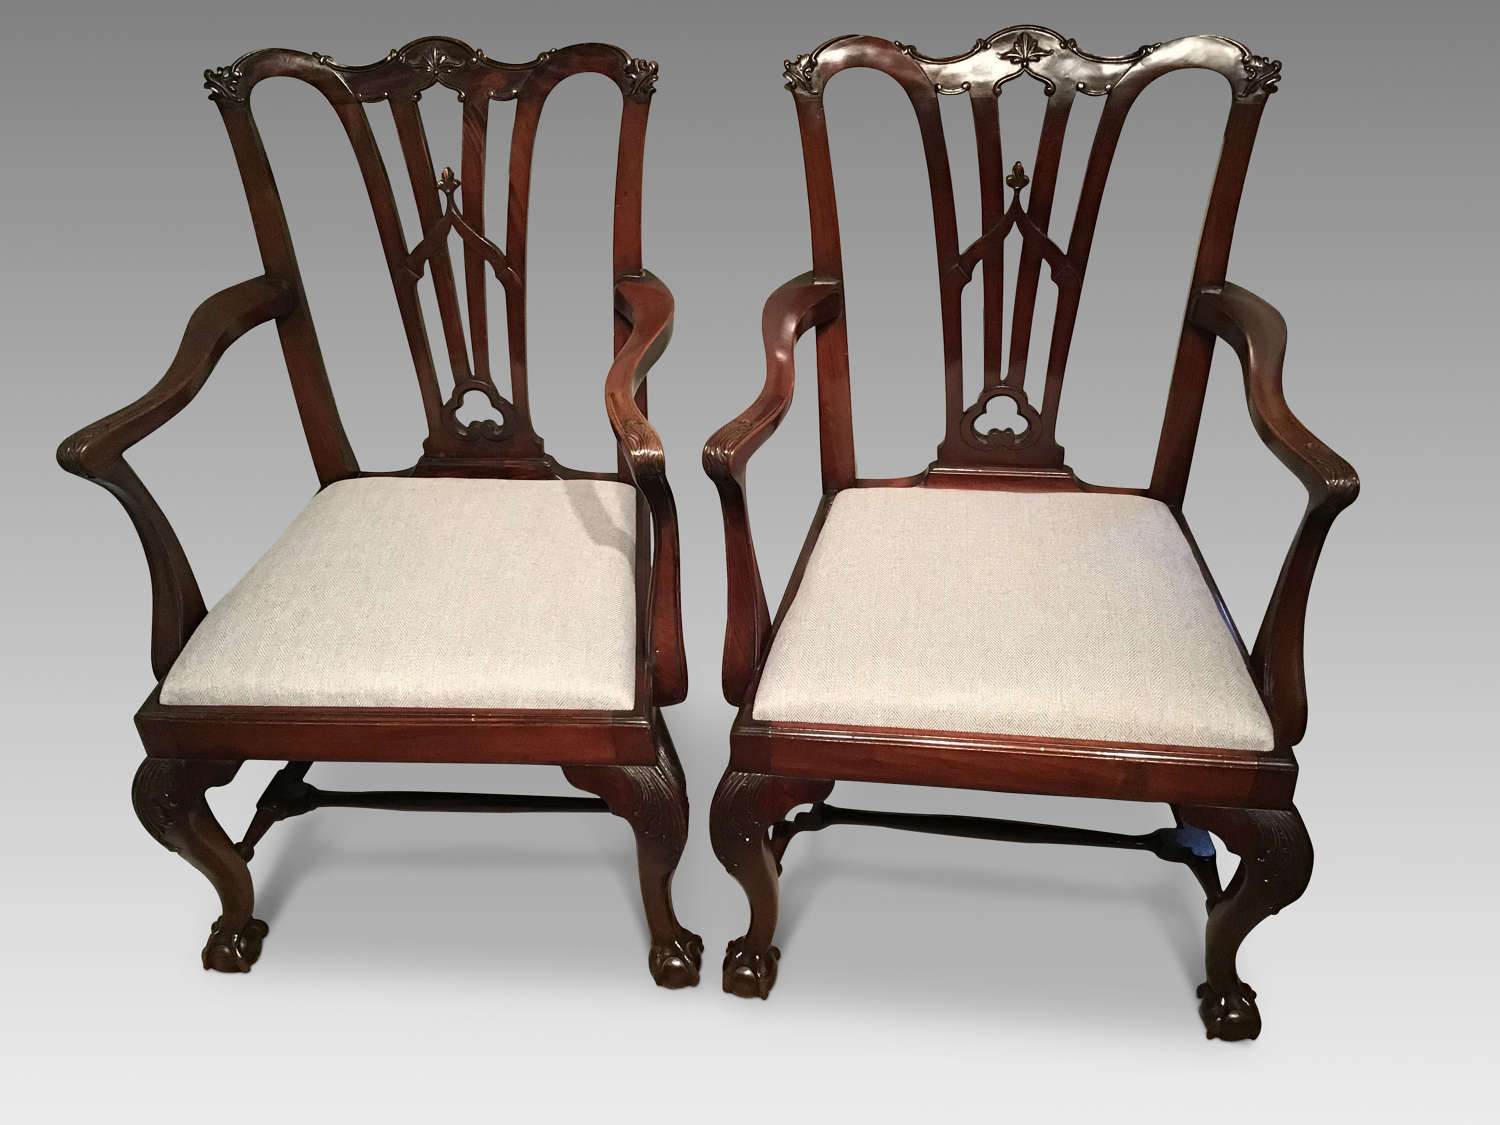 Pair of antique mahogany elbow chairs